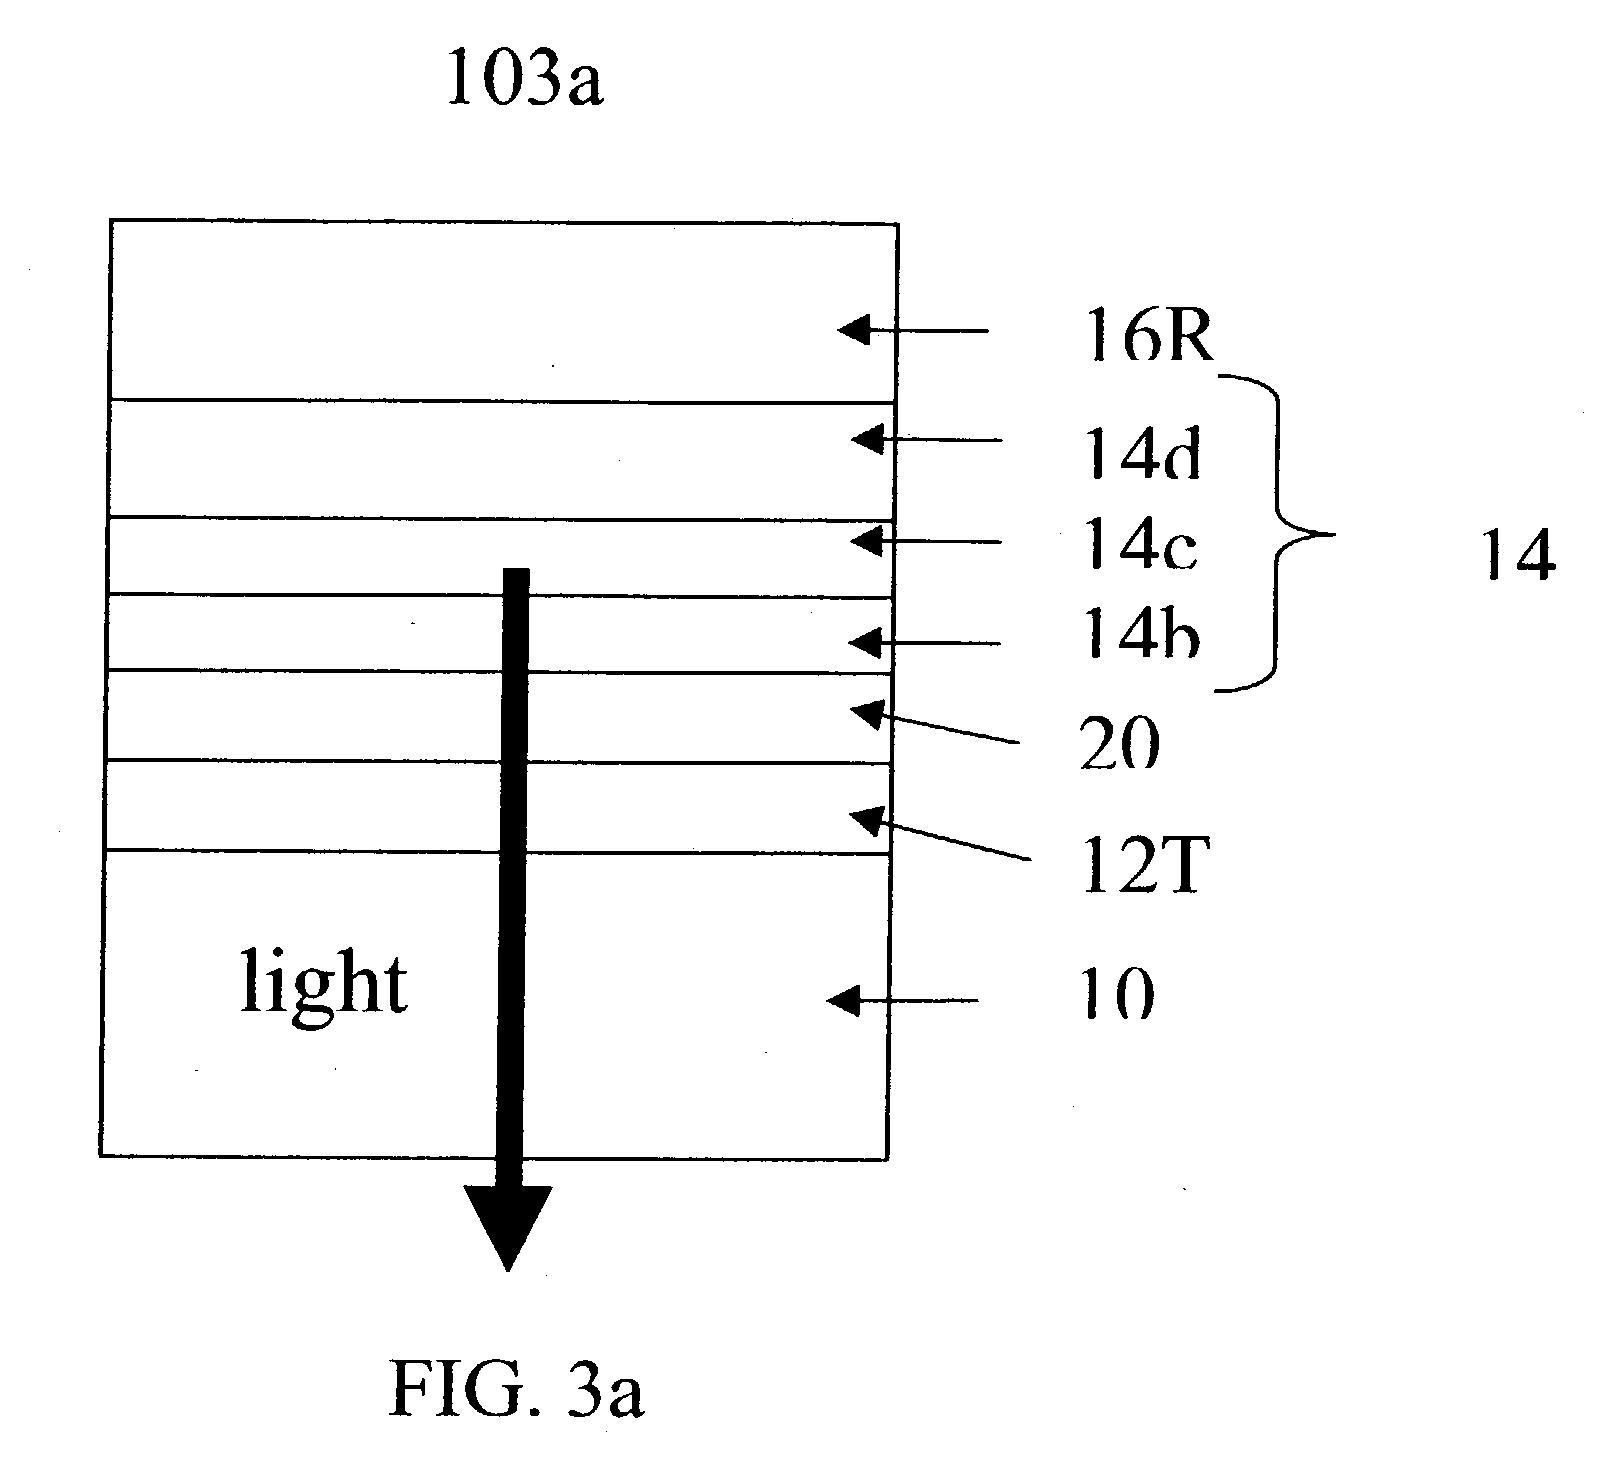 Microcavity OLED devices